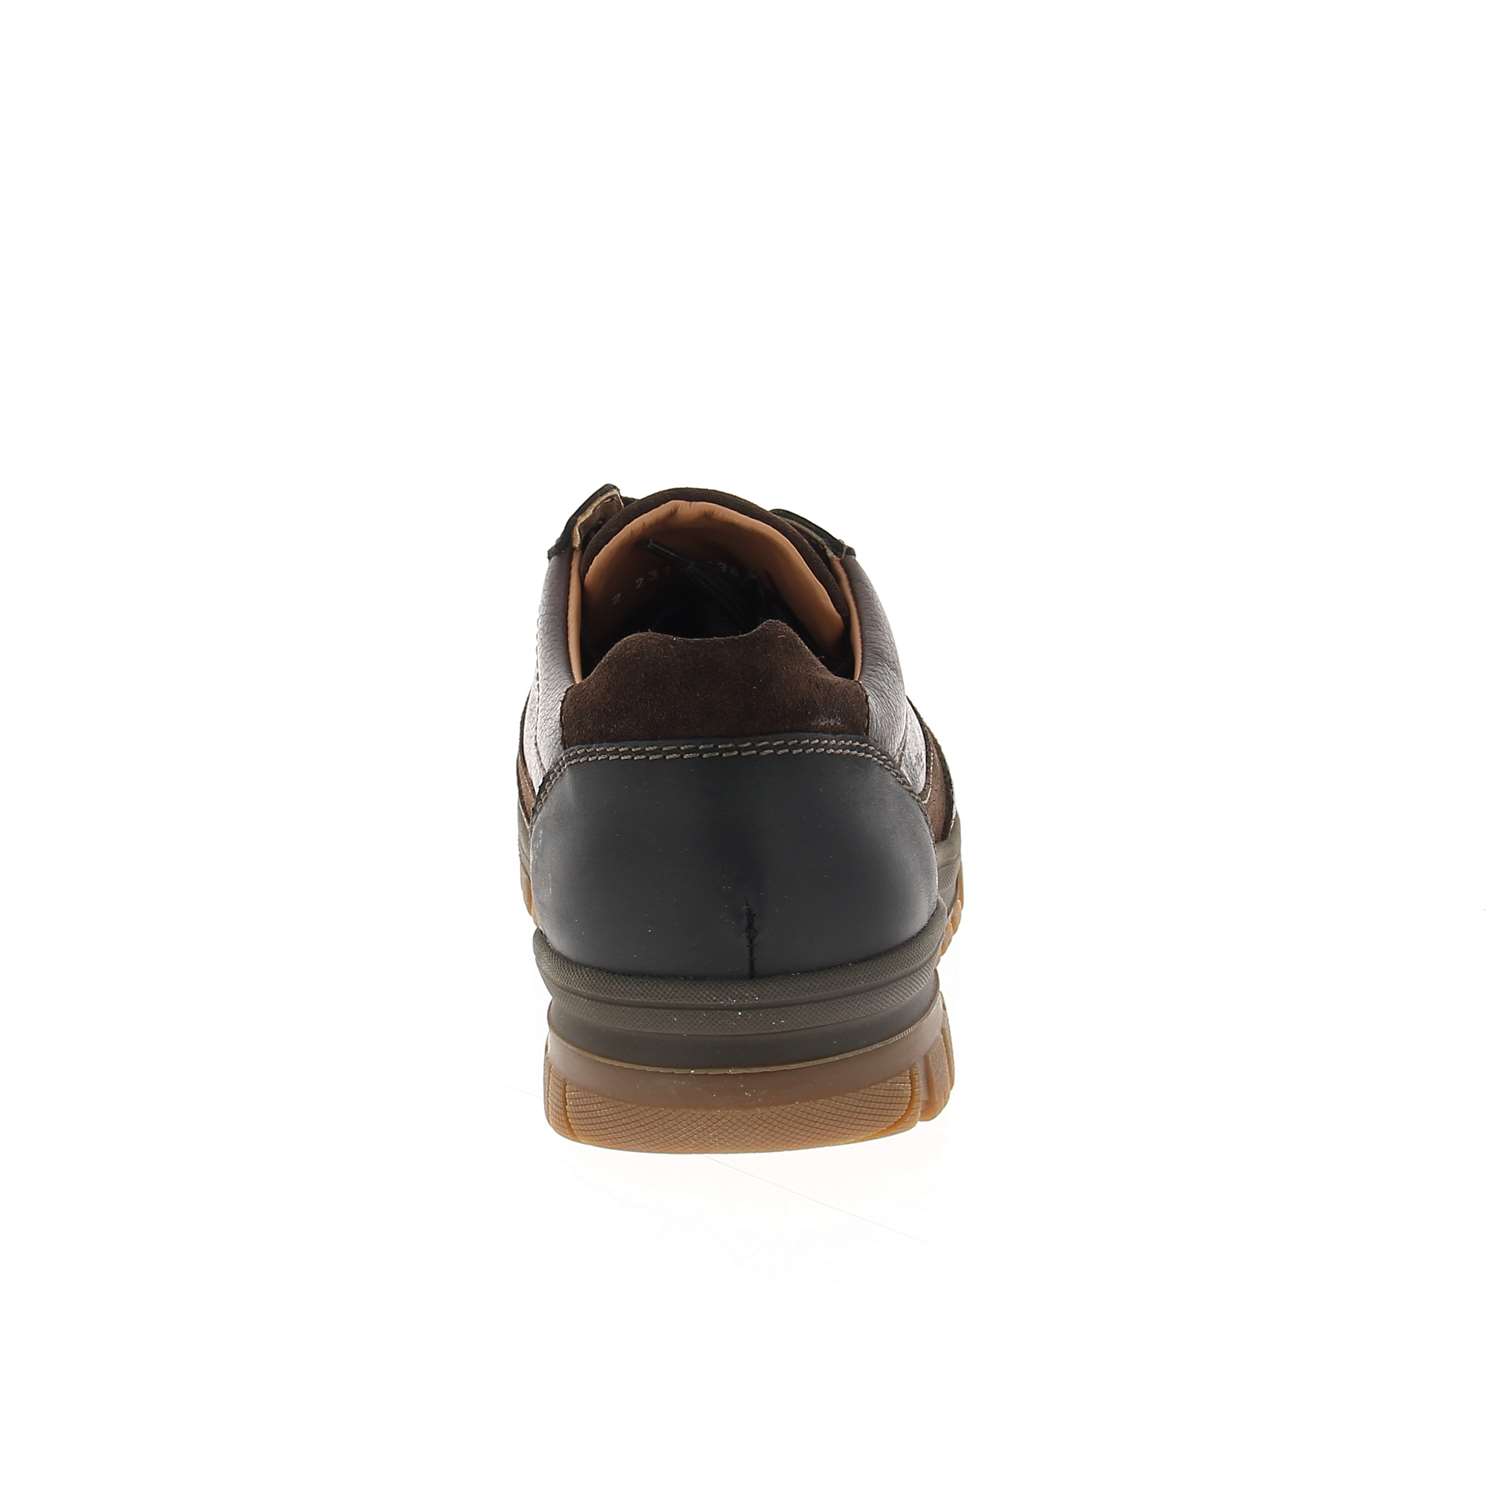 04 - PACO - MEPHISTO - Chaussures à lacets - Cuir